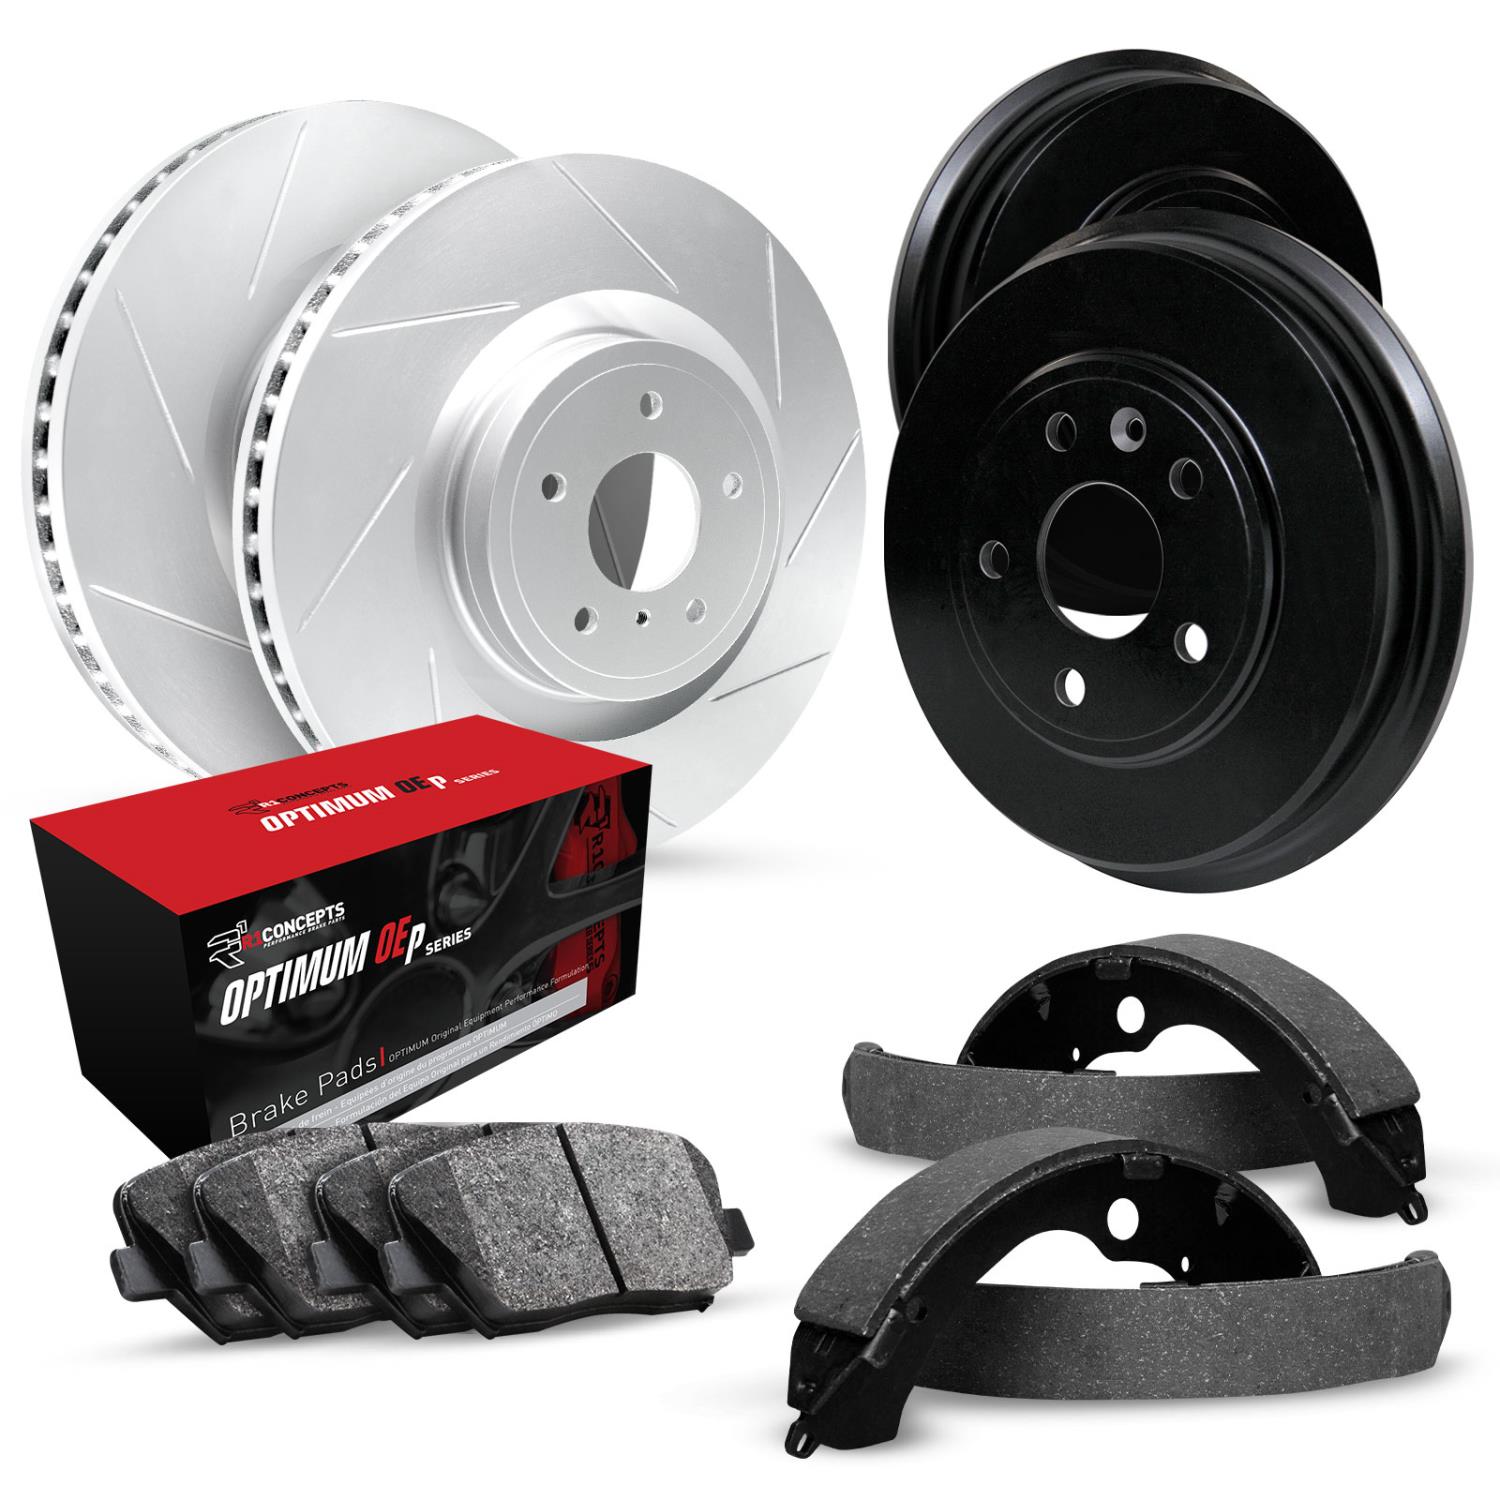 GEO-Carbon Slotted Brake Rotor & Drum Set w/Optimum OE Pads & Shoes, 1995-2004 Lexus/Toyota/Scion, Position: Front & Rear